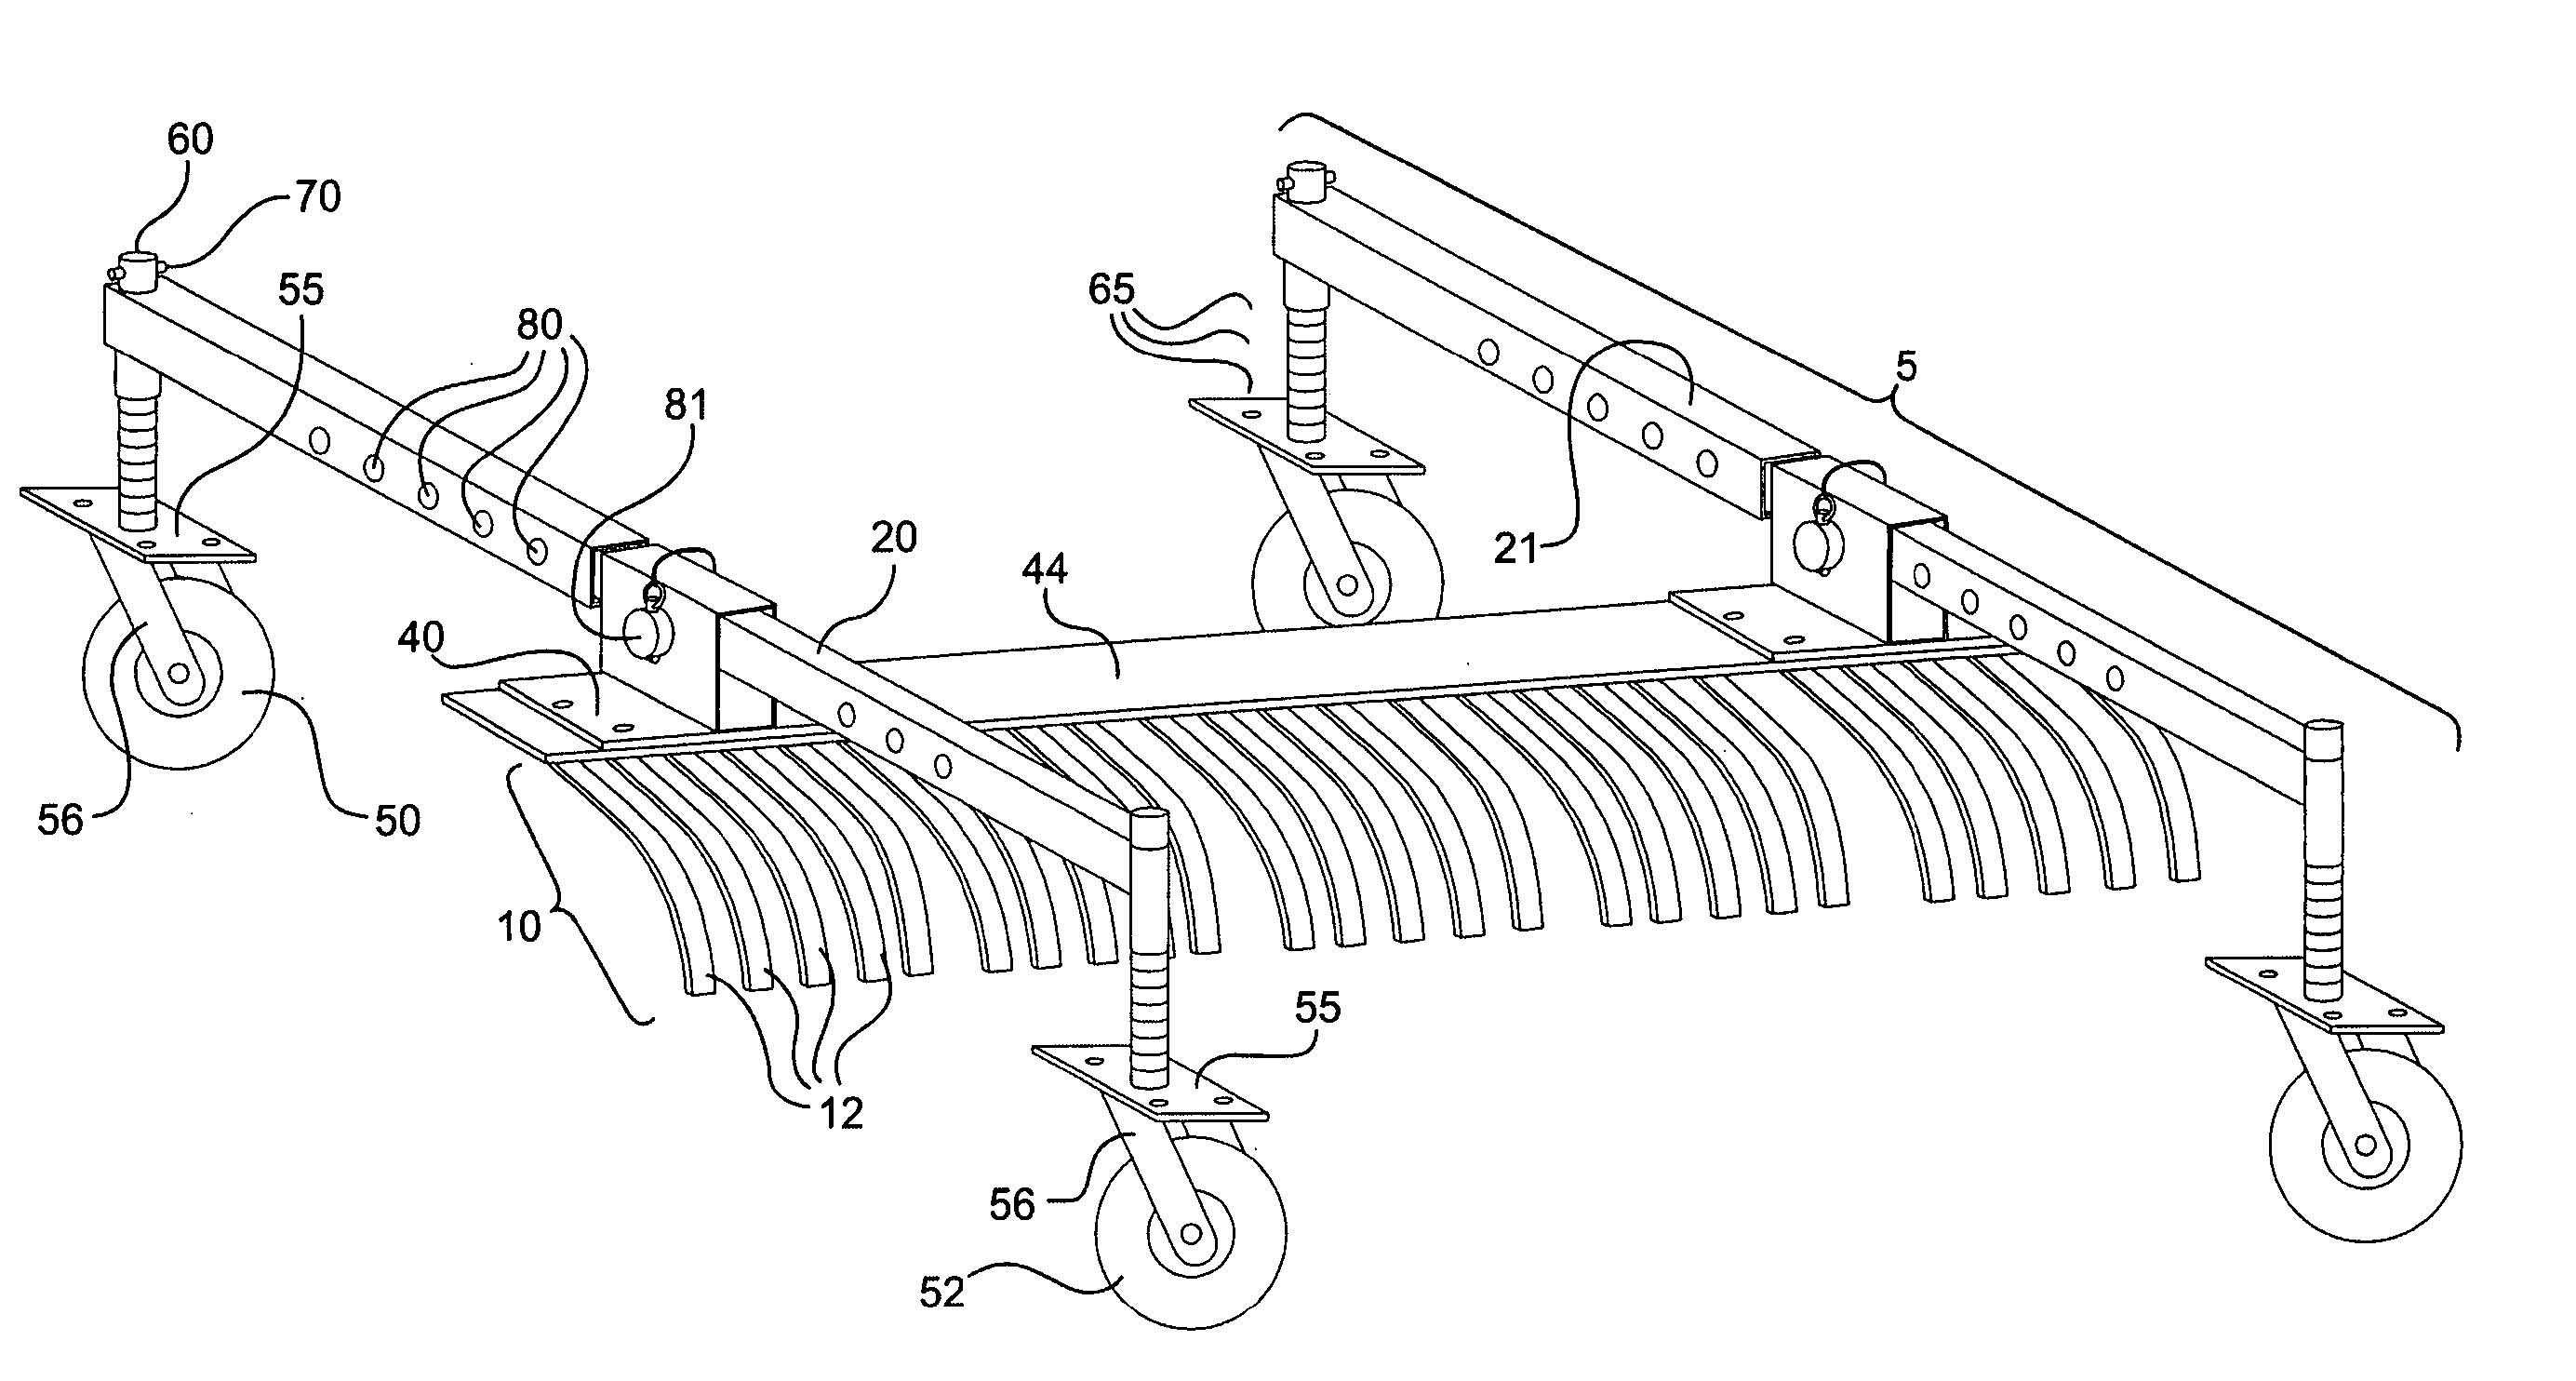 Rake with four-wheel stabilizing system